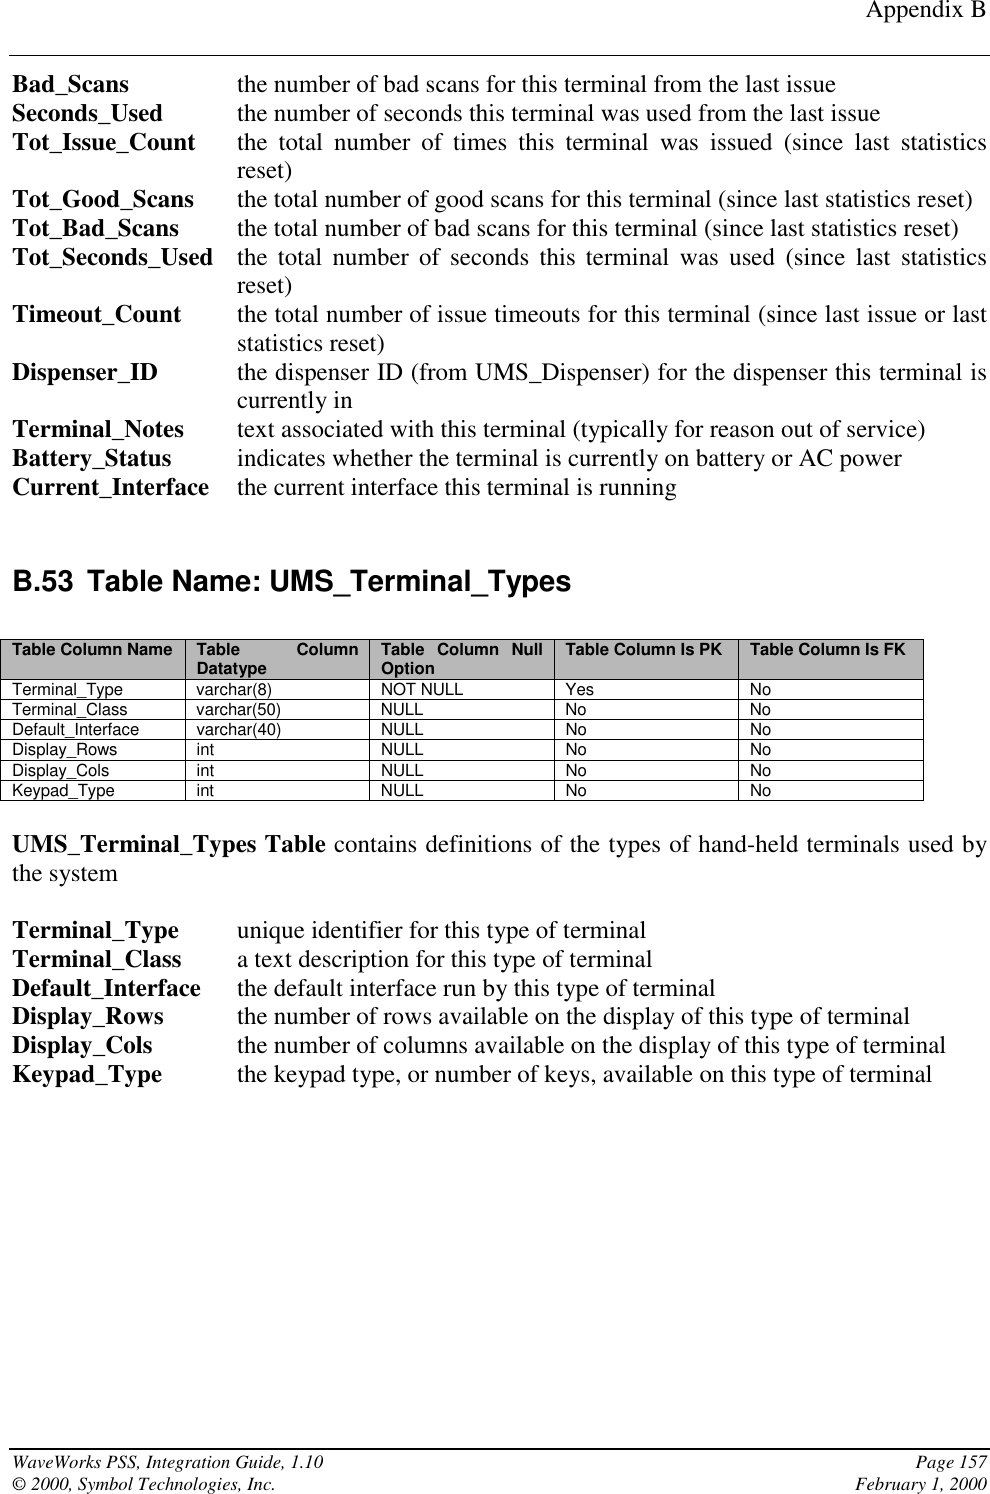 Appendix BWaveWorks PSS, Integration Guide, 1.10 Page 157© 2000, Symbol Technologies, Inc. February 1, 2000Bad_Scans the number of bad scans for this terminal from the last issueSeconds_Used the number of seconds this terminal was used from the last issueTot_Issue_Count the total number of times this terminal was issued (since last statisticsreset)Tot_Good_Scans the total number of good scans for this terminal (since last statistics reset)Tot_Bad_Scans the total number of bad scans for this terminal (since last statistics reset)Tot_Seconds_Used the total number of seconds this terminal was used (since last statisticsreset)Timeout_Count the total number of issue timeouts for this terminal (since last issue or laststatistics reset)Dispenser_ID the dispenser ID (from UMS_Dispenser) for the dispenser this terminal iscurrently inTerminal_Notes text associated with this terminal (typically for reason out of service)Battery_Status indicates whether the terminal is currently on battery or AC powerCurrent_Interface the current interface this terminal is runningB.53 Table Name: UMS_Terminal_TypesTable Column Name Table ColumnDatatype Table Column NullOption Table Column Is PK Table Column Is FKTerminal_Type varchar(8) NOT NULL Yes NoTerminal_Class varchar(50) NULL No NoDefault_Interface varchar(40) NULL No NoDisplay_Rows int NULL No NoDisplay_Cols int NULL No NoKeypad_Type int NULL No NoUMS_Terminal_Types Table contains definitions of the types of hand-held terminals used bythe systemTerminal_Type unique identifier for this type of terminalTerminal_Class a text description for this type of terminalDefault_Interface the default interface run by this type of terminalDisplay_Rows the number of rows available on the display of this type of terminalDisplay_Cols the number of columns available on the display of this type of terminalKeypad_Type the keypad type, or number of keys, available on this type of terminal